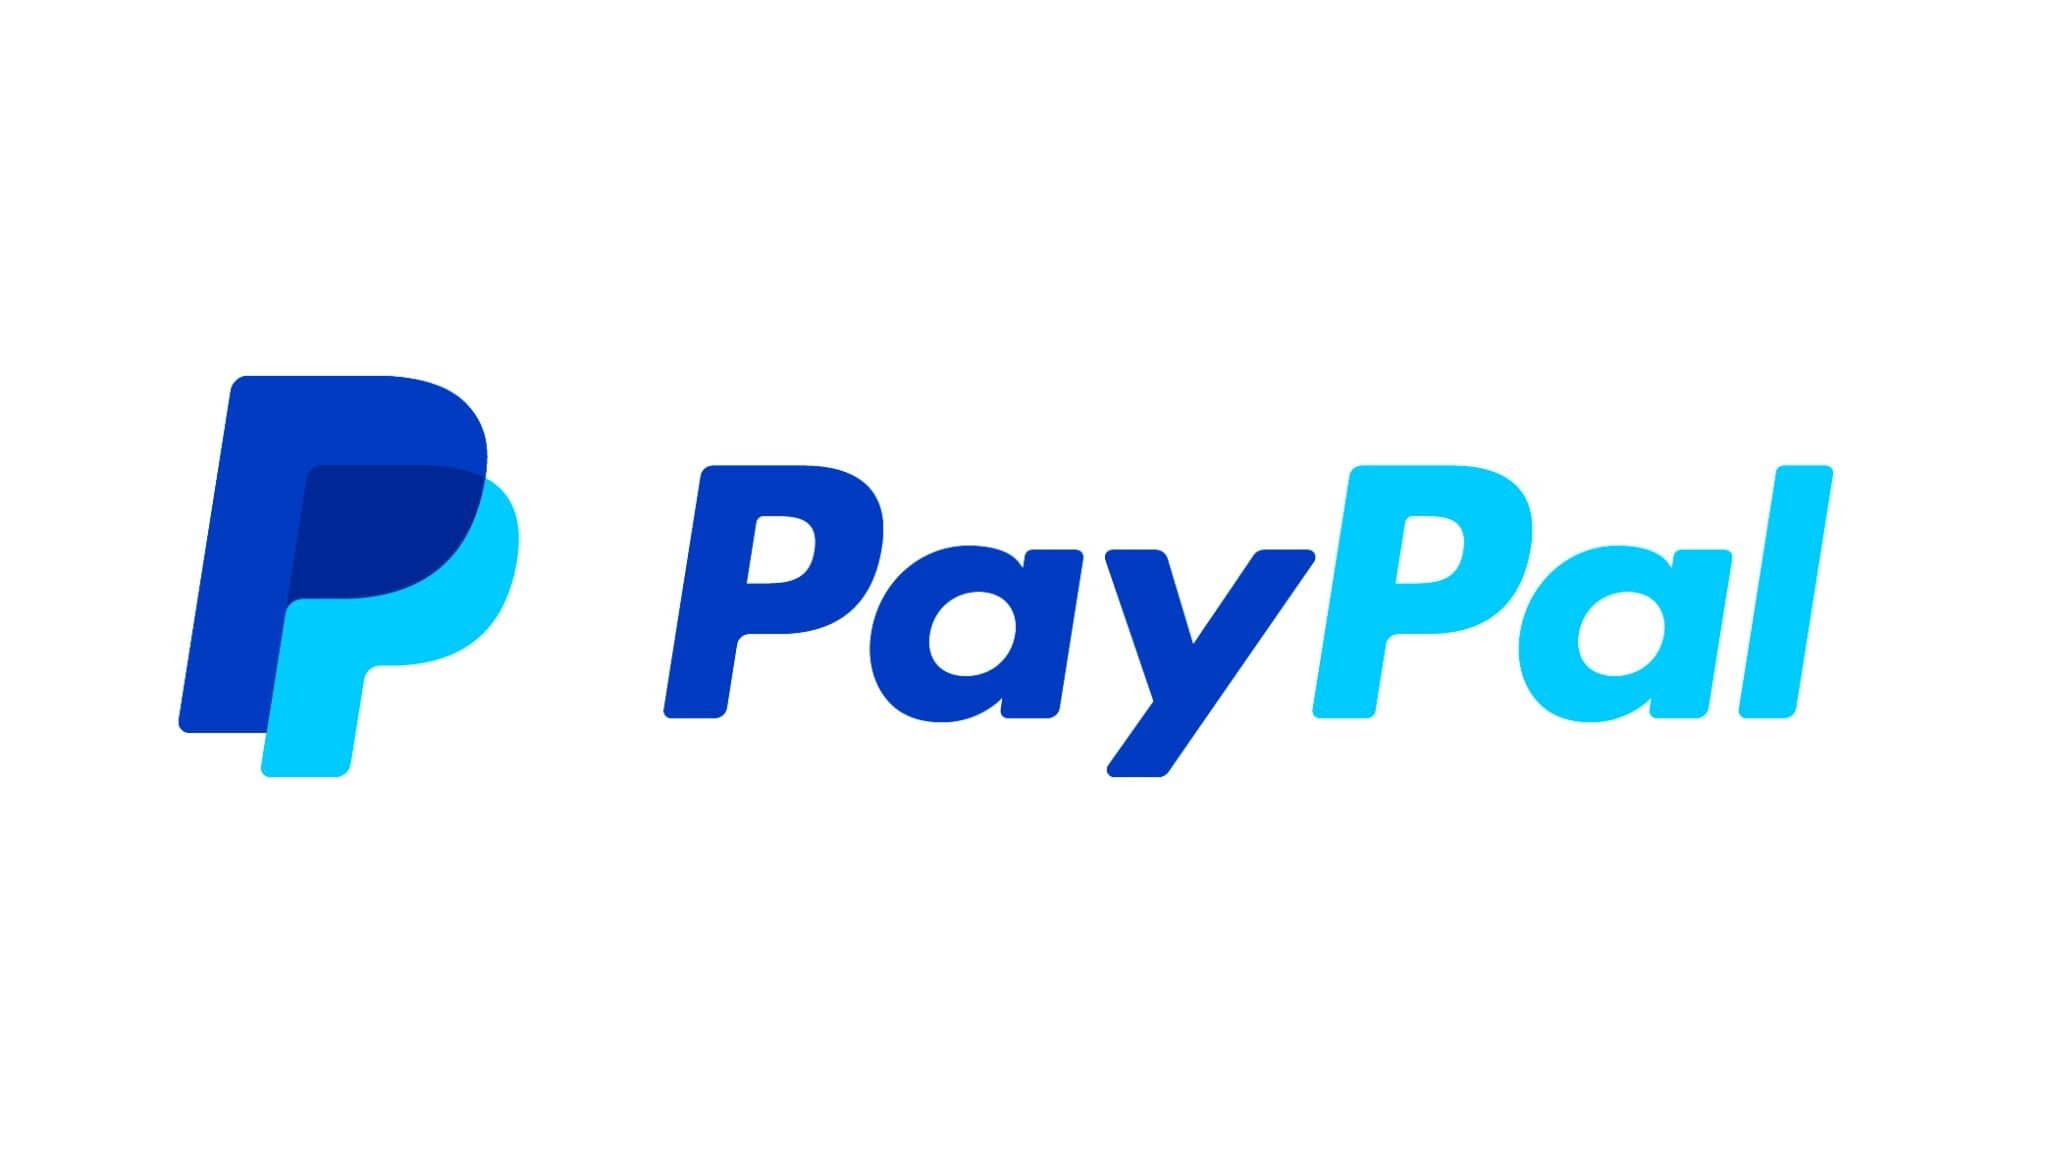 Former Founders Of Paypal Severely Criticise The Debanking Policies Of The Payment Giant